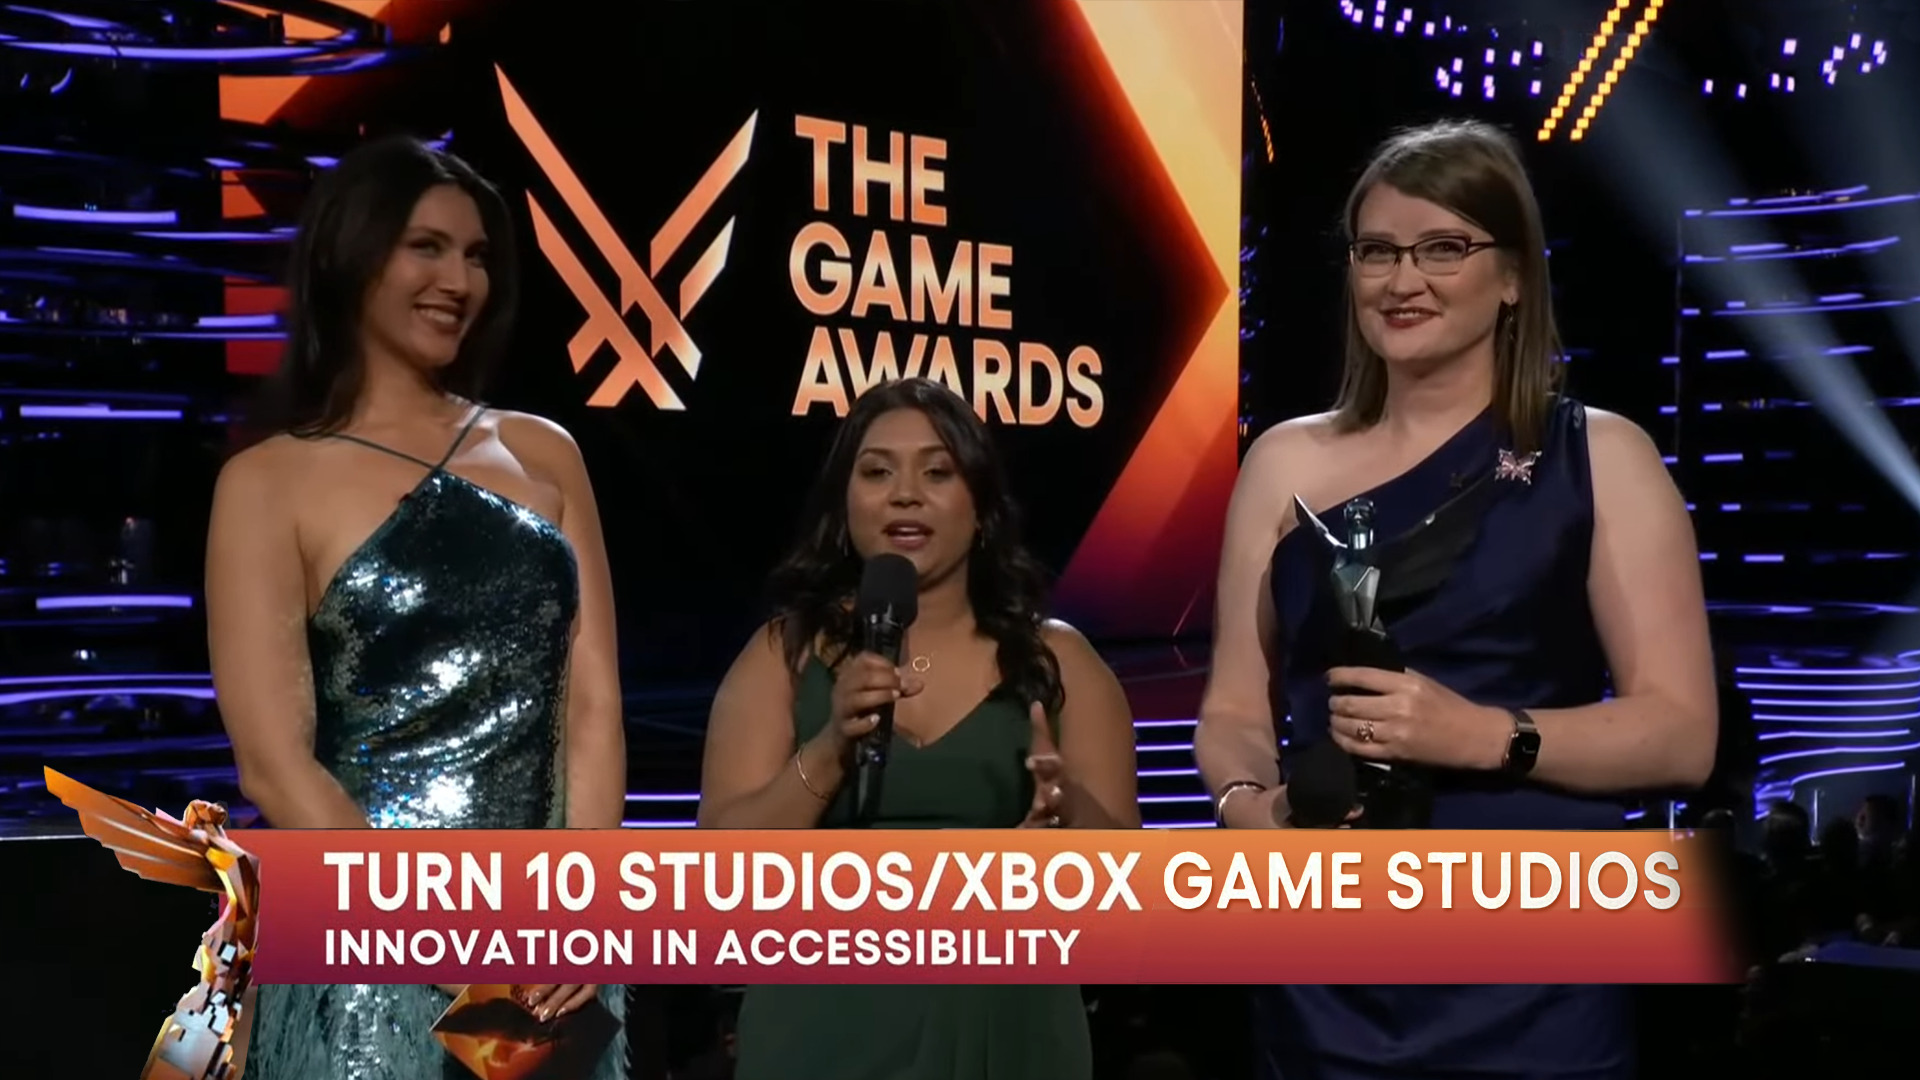 Forza Motorsport wins Innovation in Accessibility at The Game